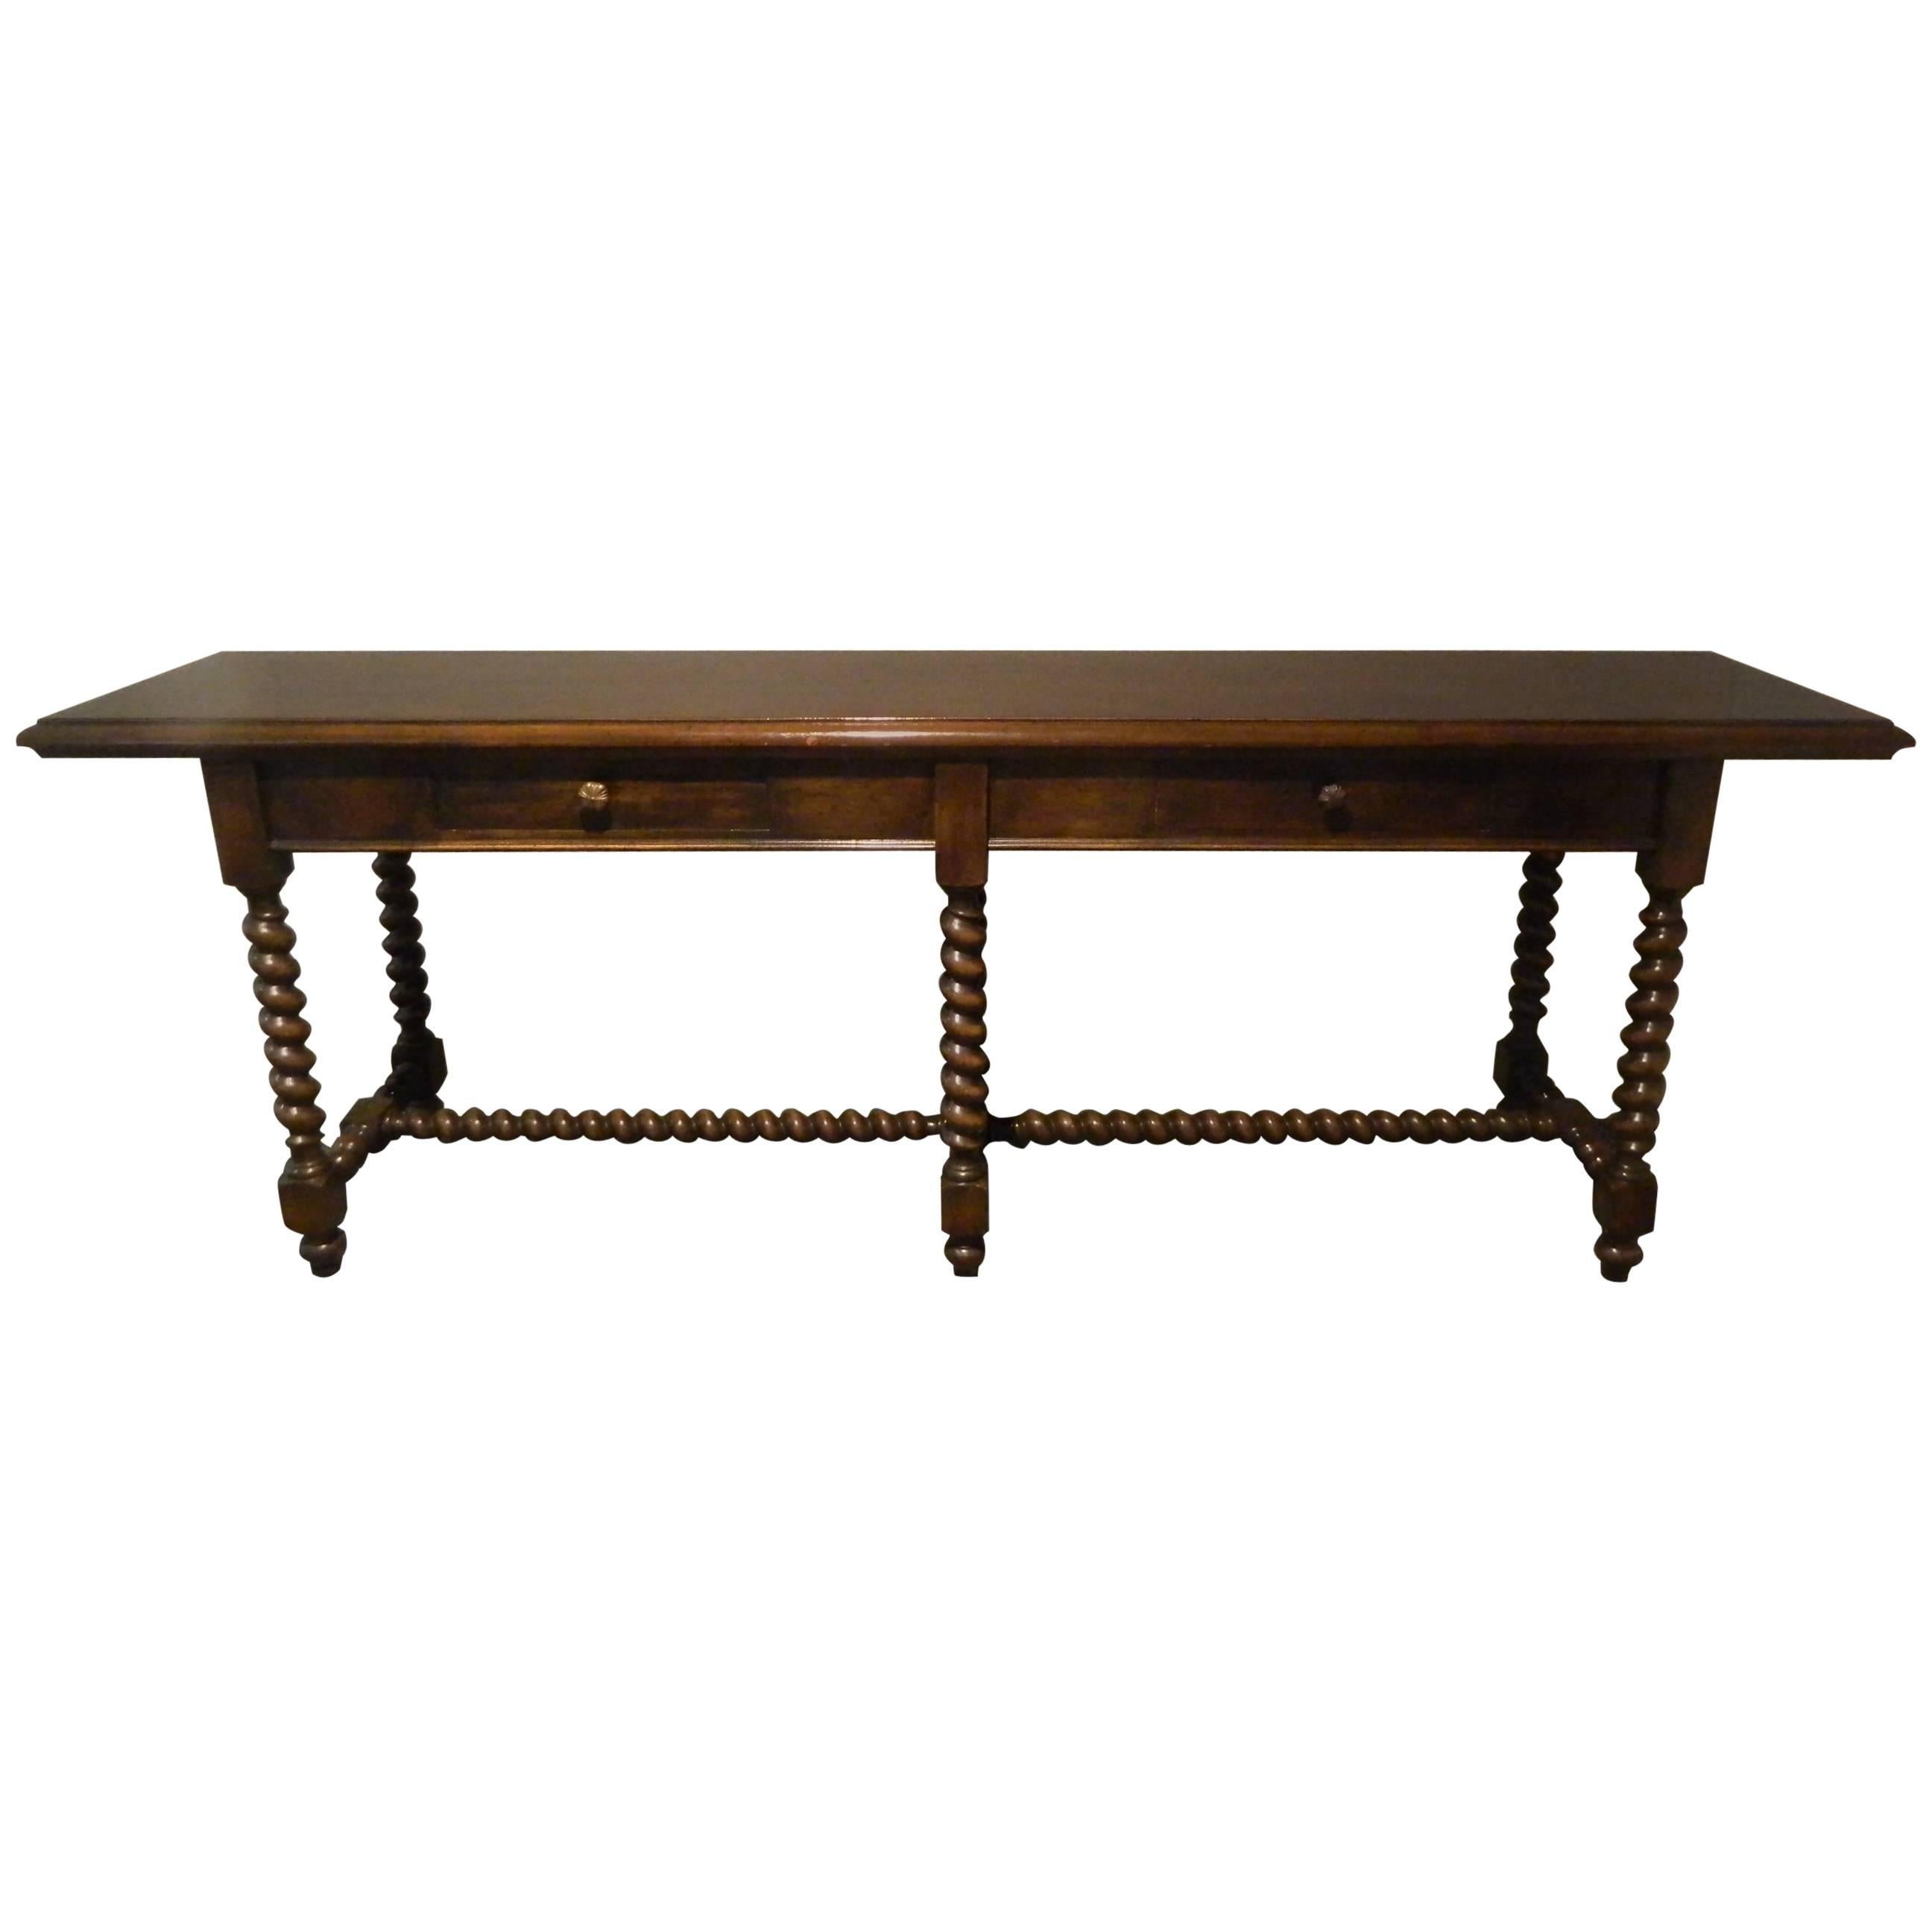 English Walnut Console or Serving Table, 19th Century